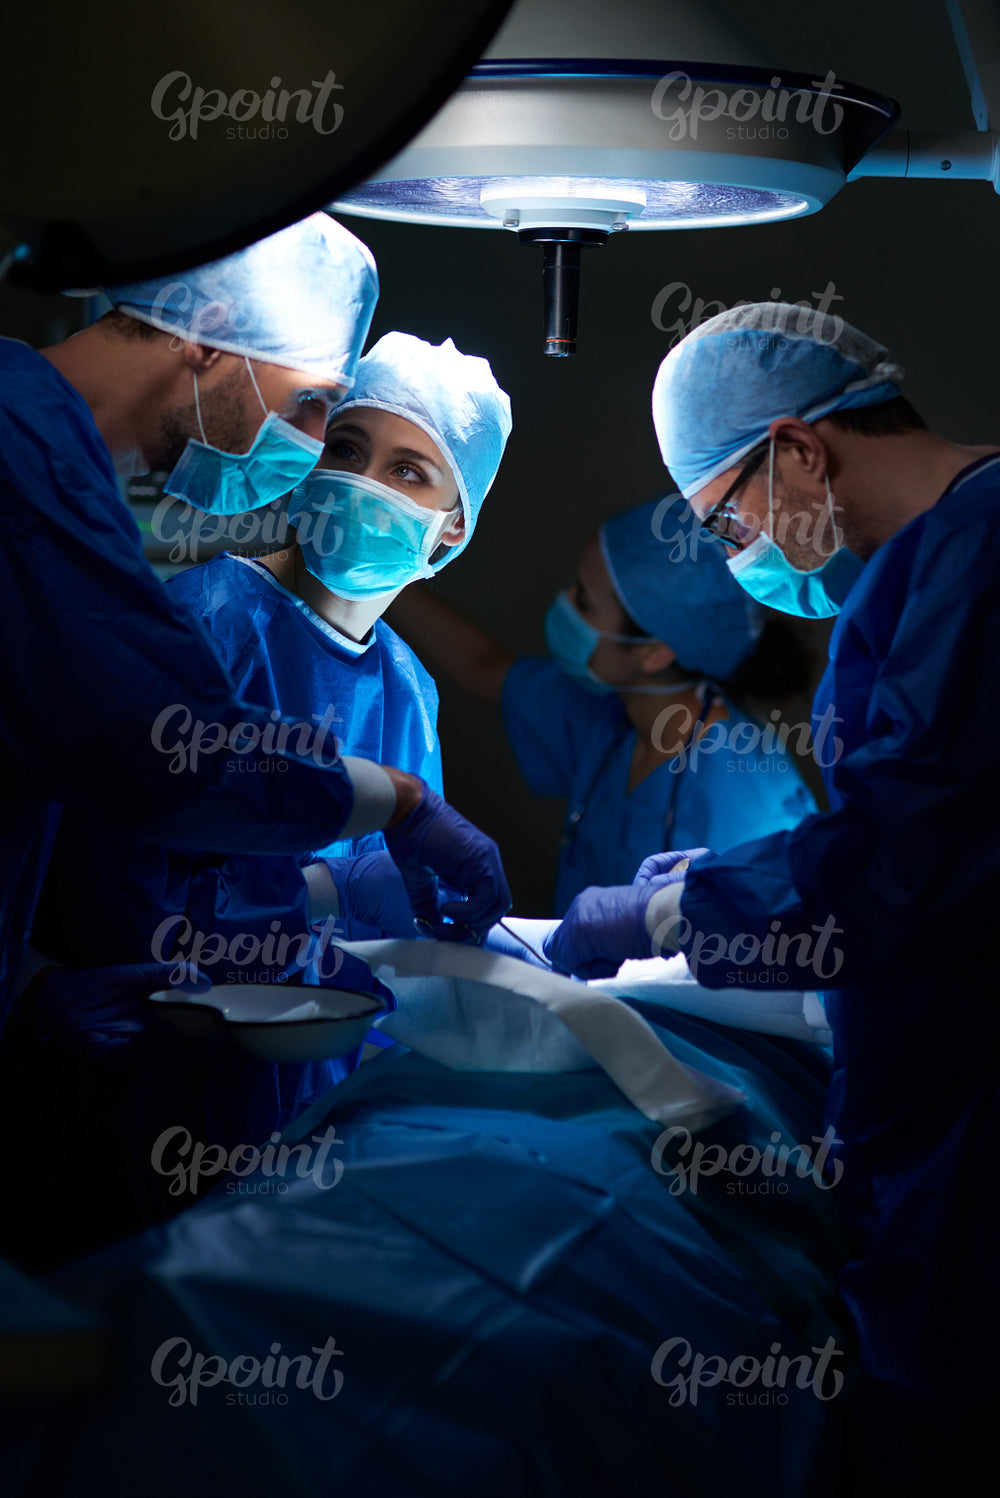 Team of surgeons making important operation